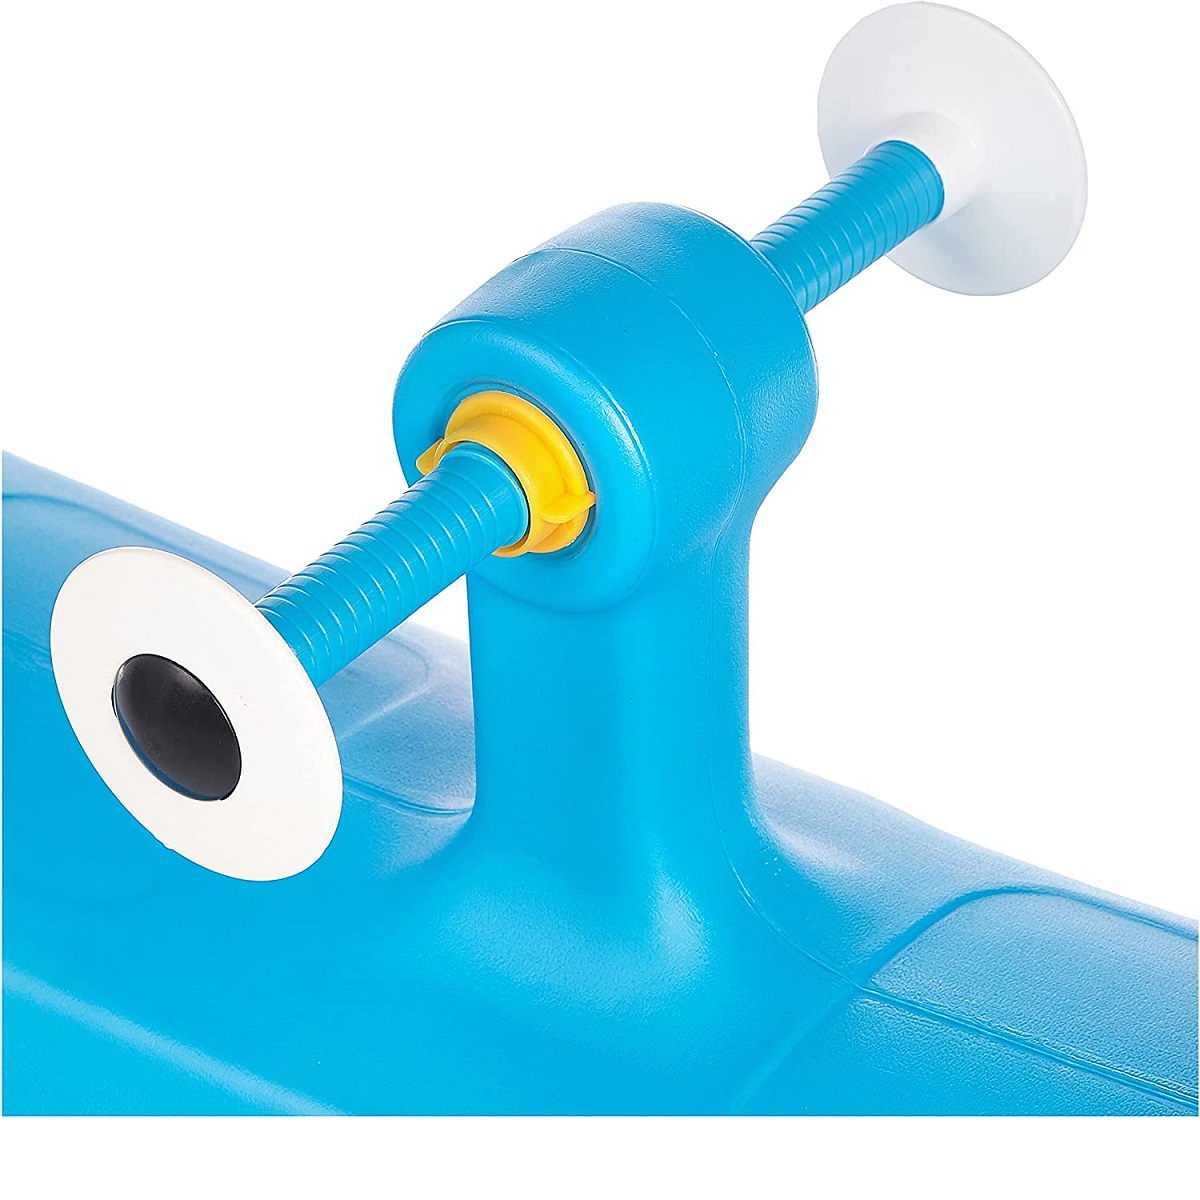 Ching Ching -Baby, toodler, children Crab seesaw